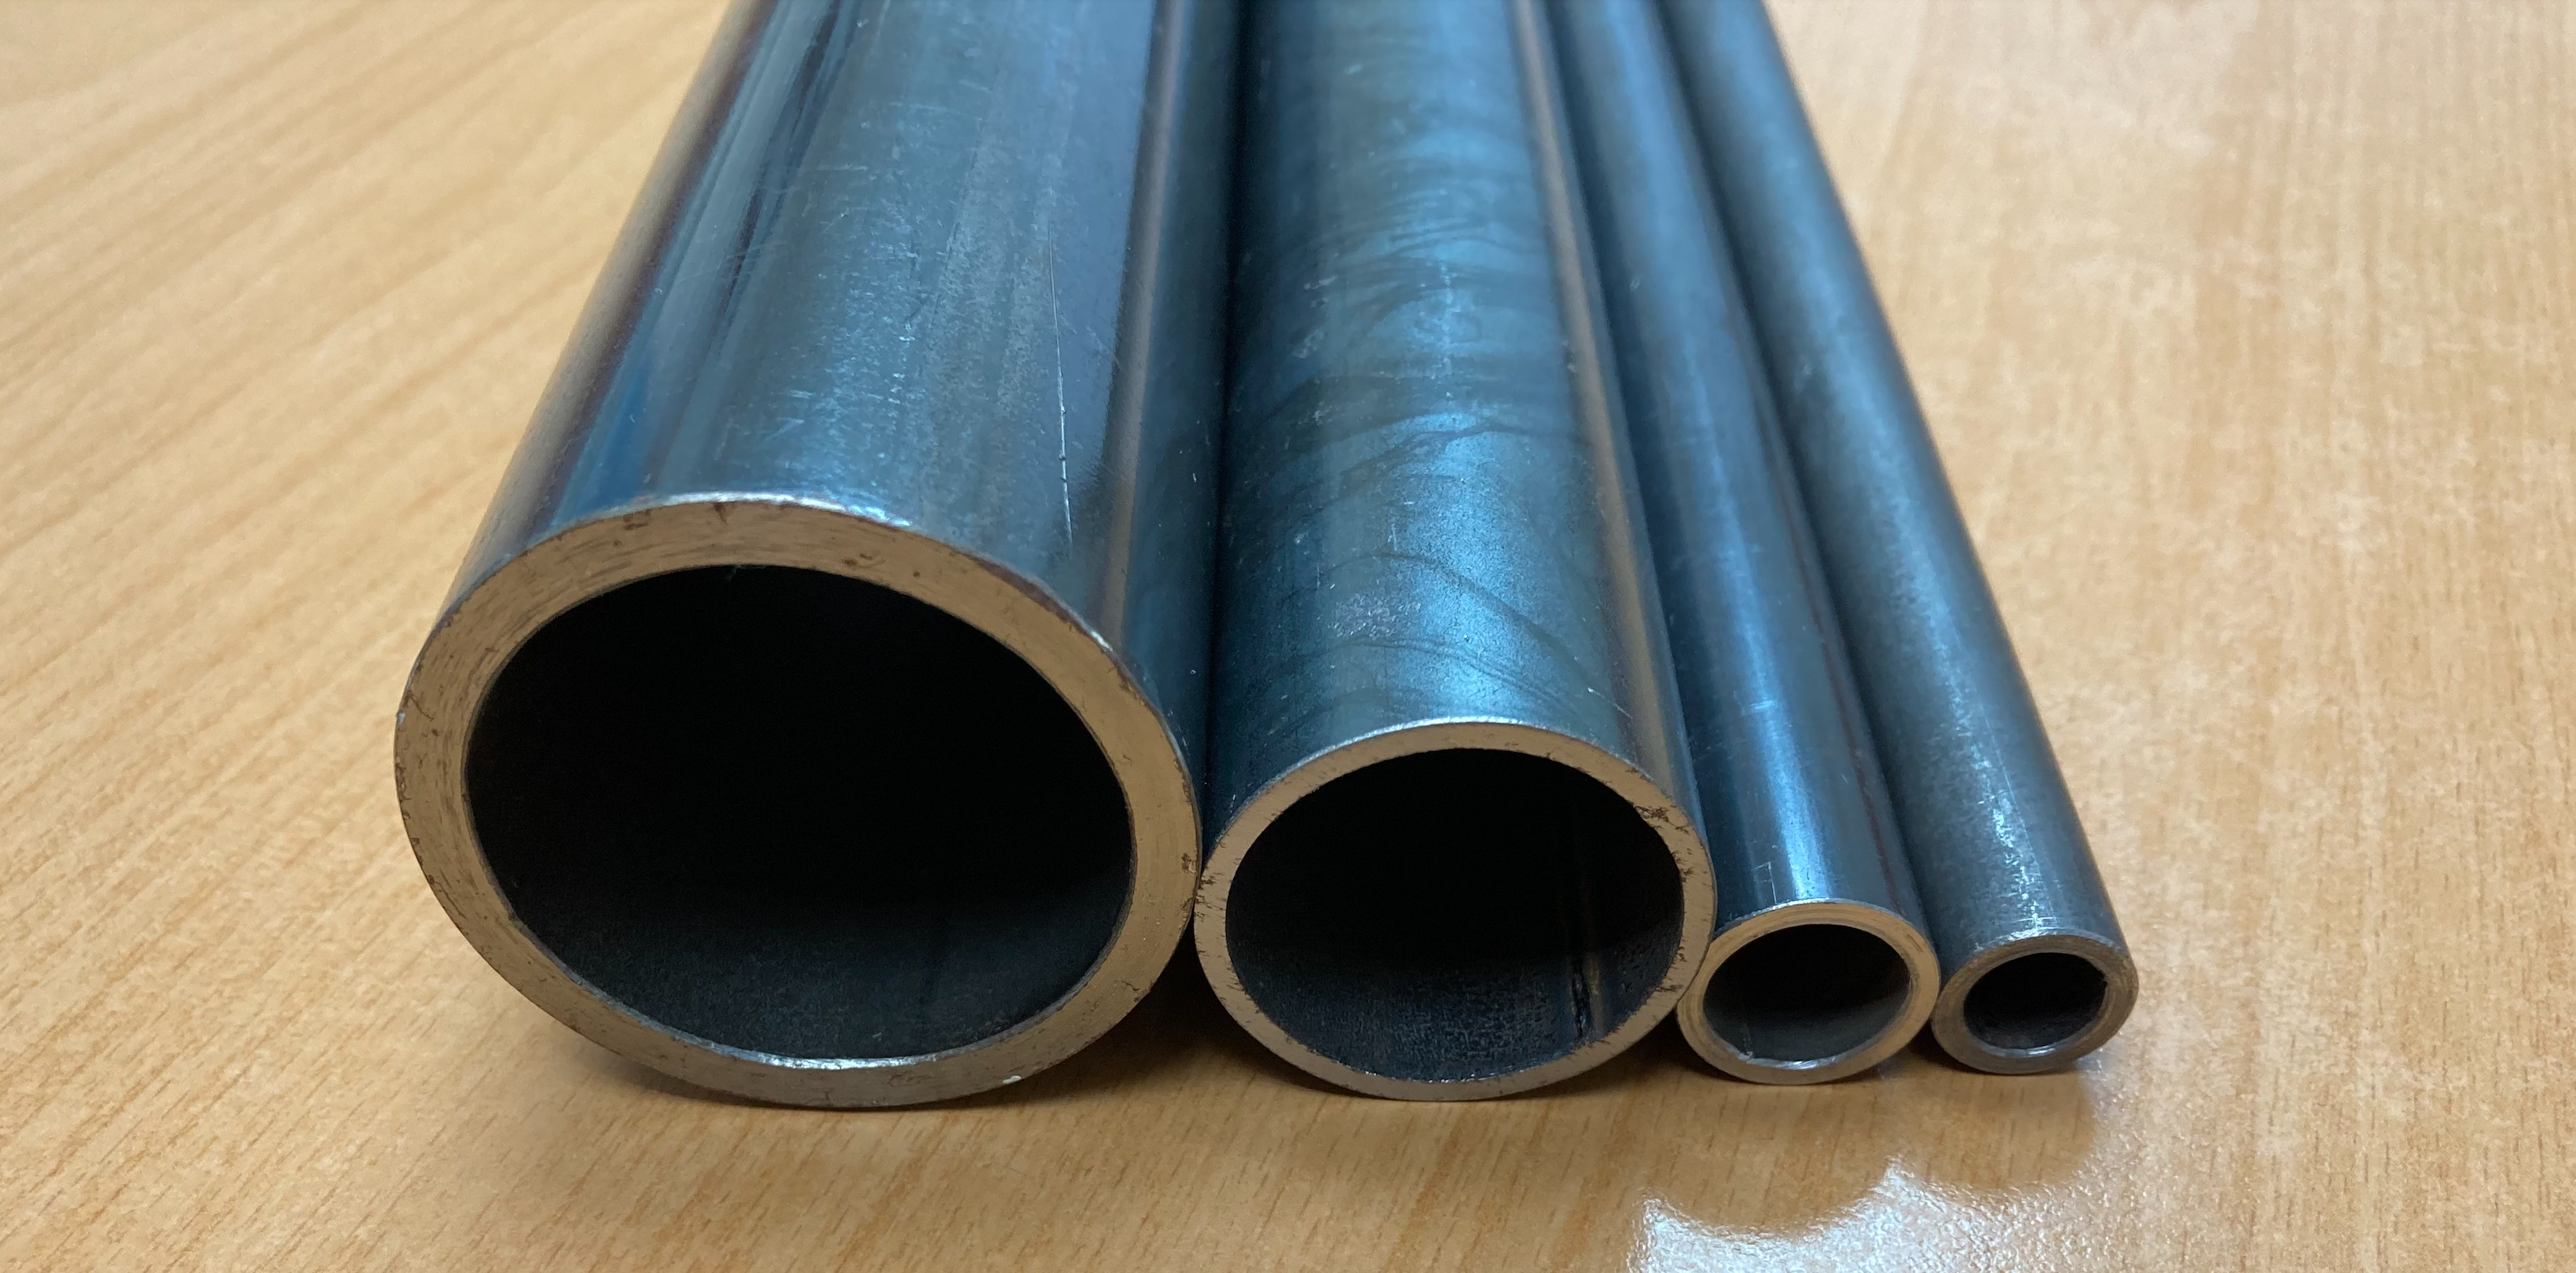 3 Reasons to Choose Daiwa Lance's Oxygen Lance Pipes for Copper Smelters